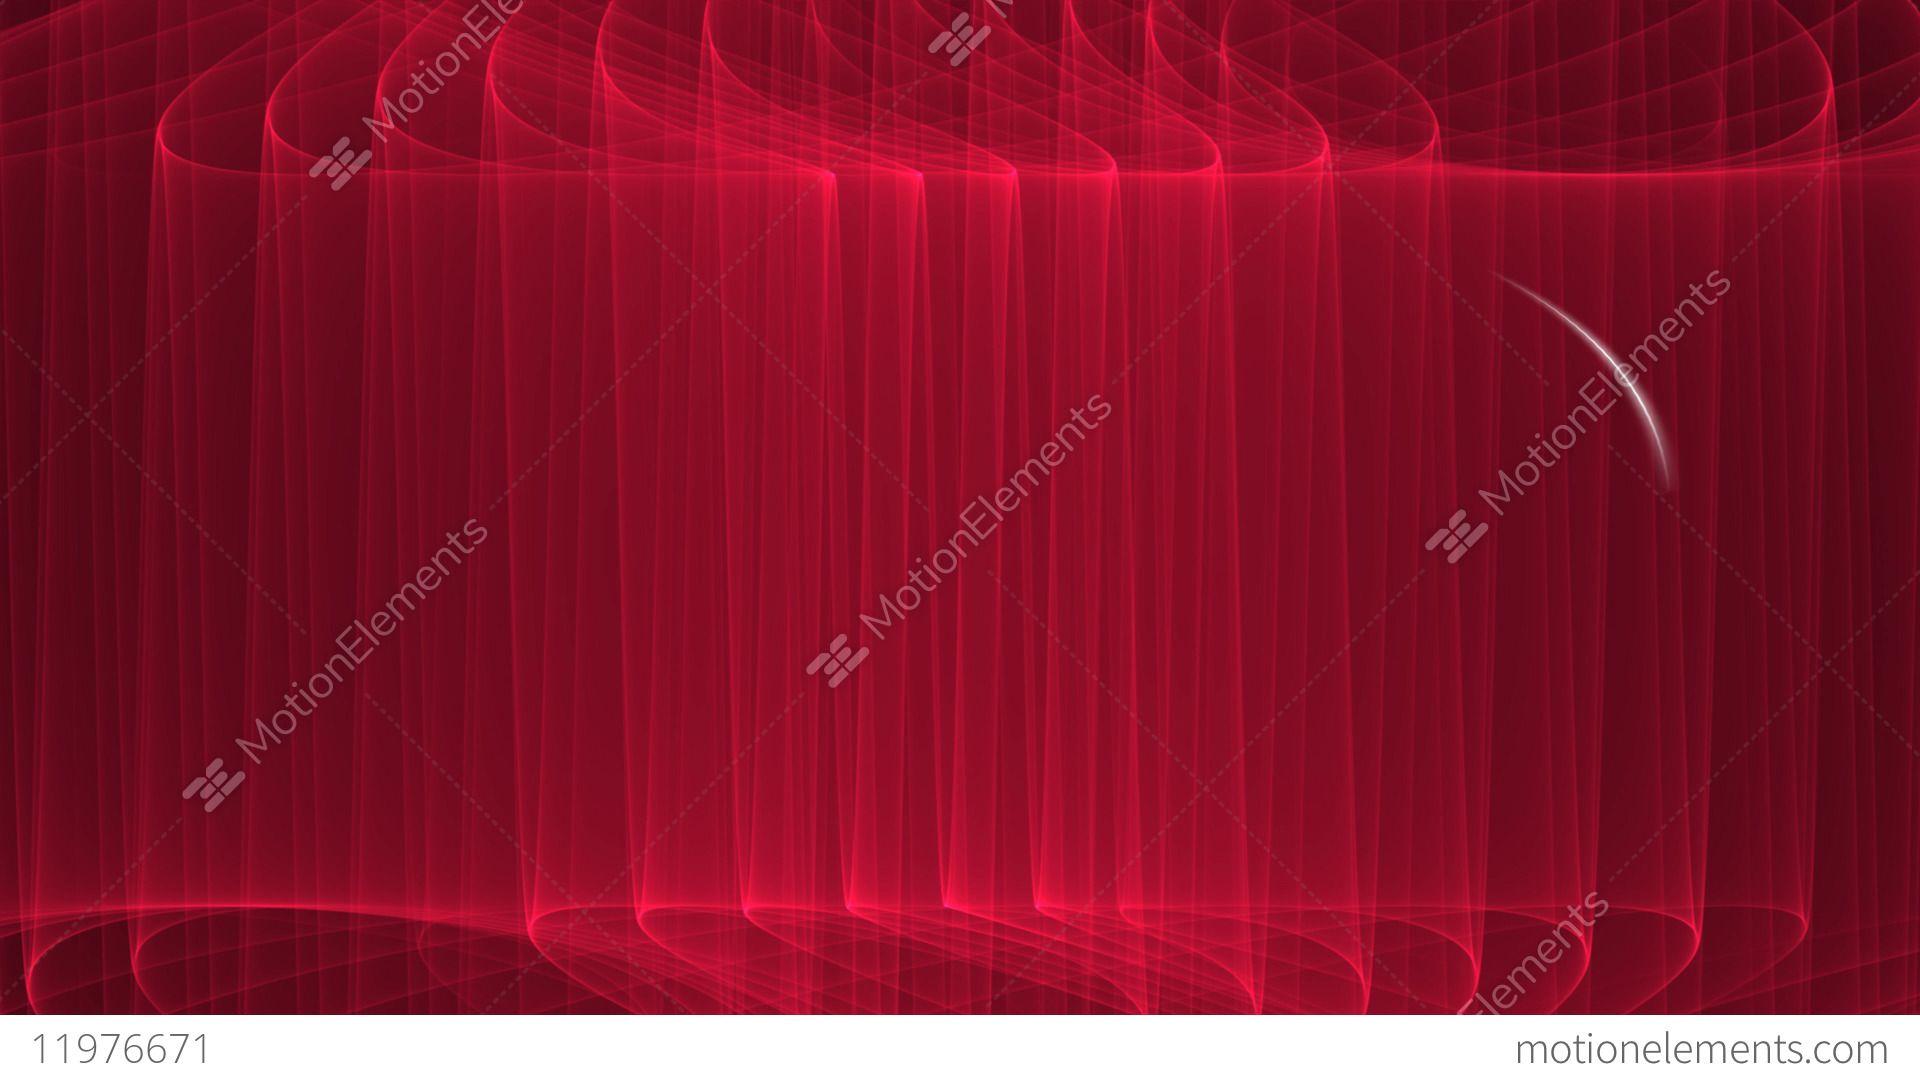 White with Red Curve Logo - Dark Red Curves Background With Little White Cosmic Object Comet